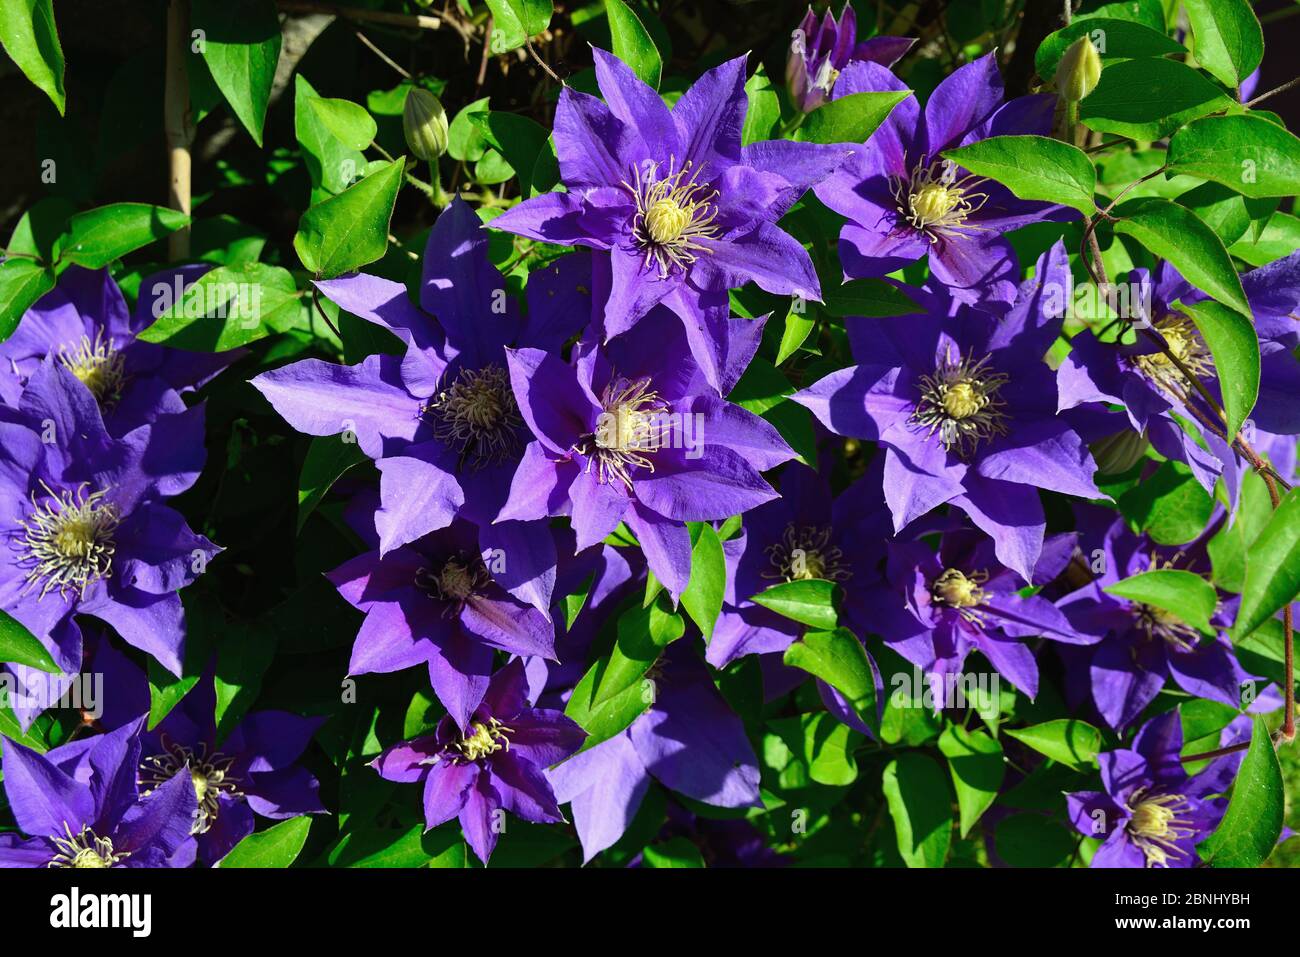 Clematis is a genus of about 300 species within the buttercup family, Ranunculaceae. Their garden hybrids have been popular among gardeners. Stock Photo